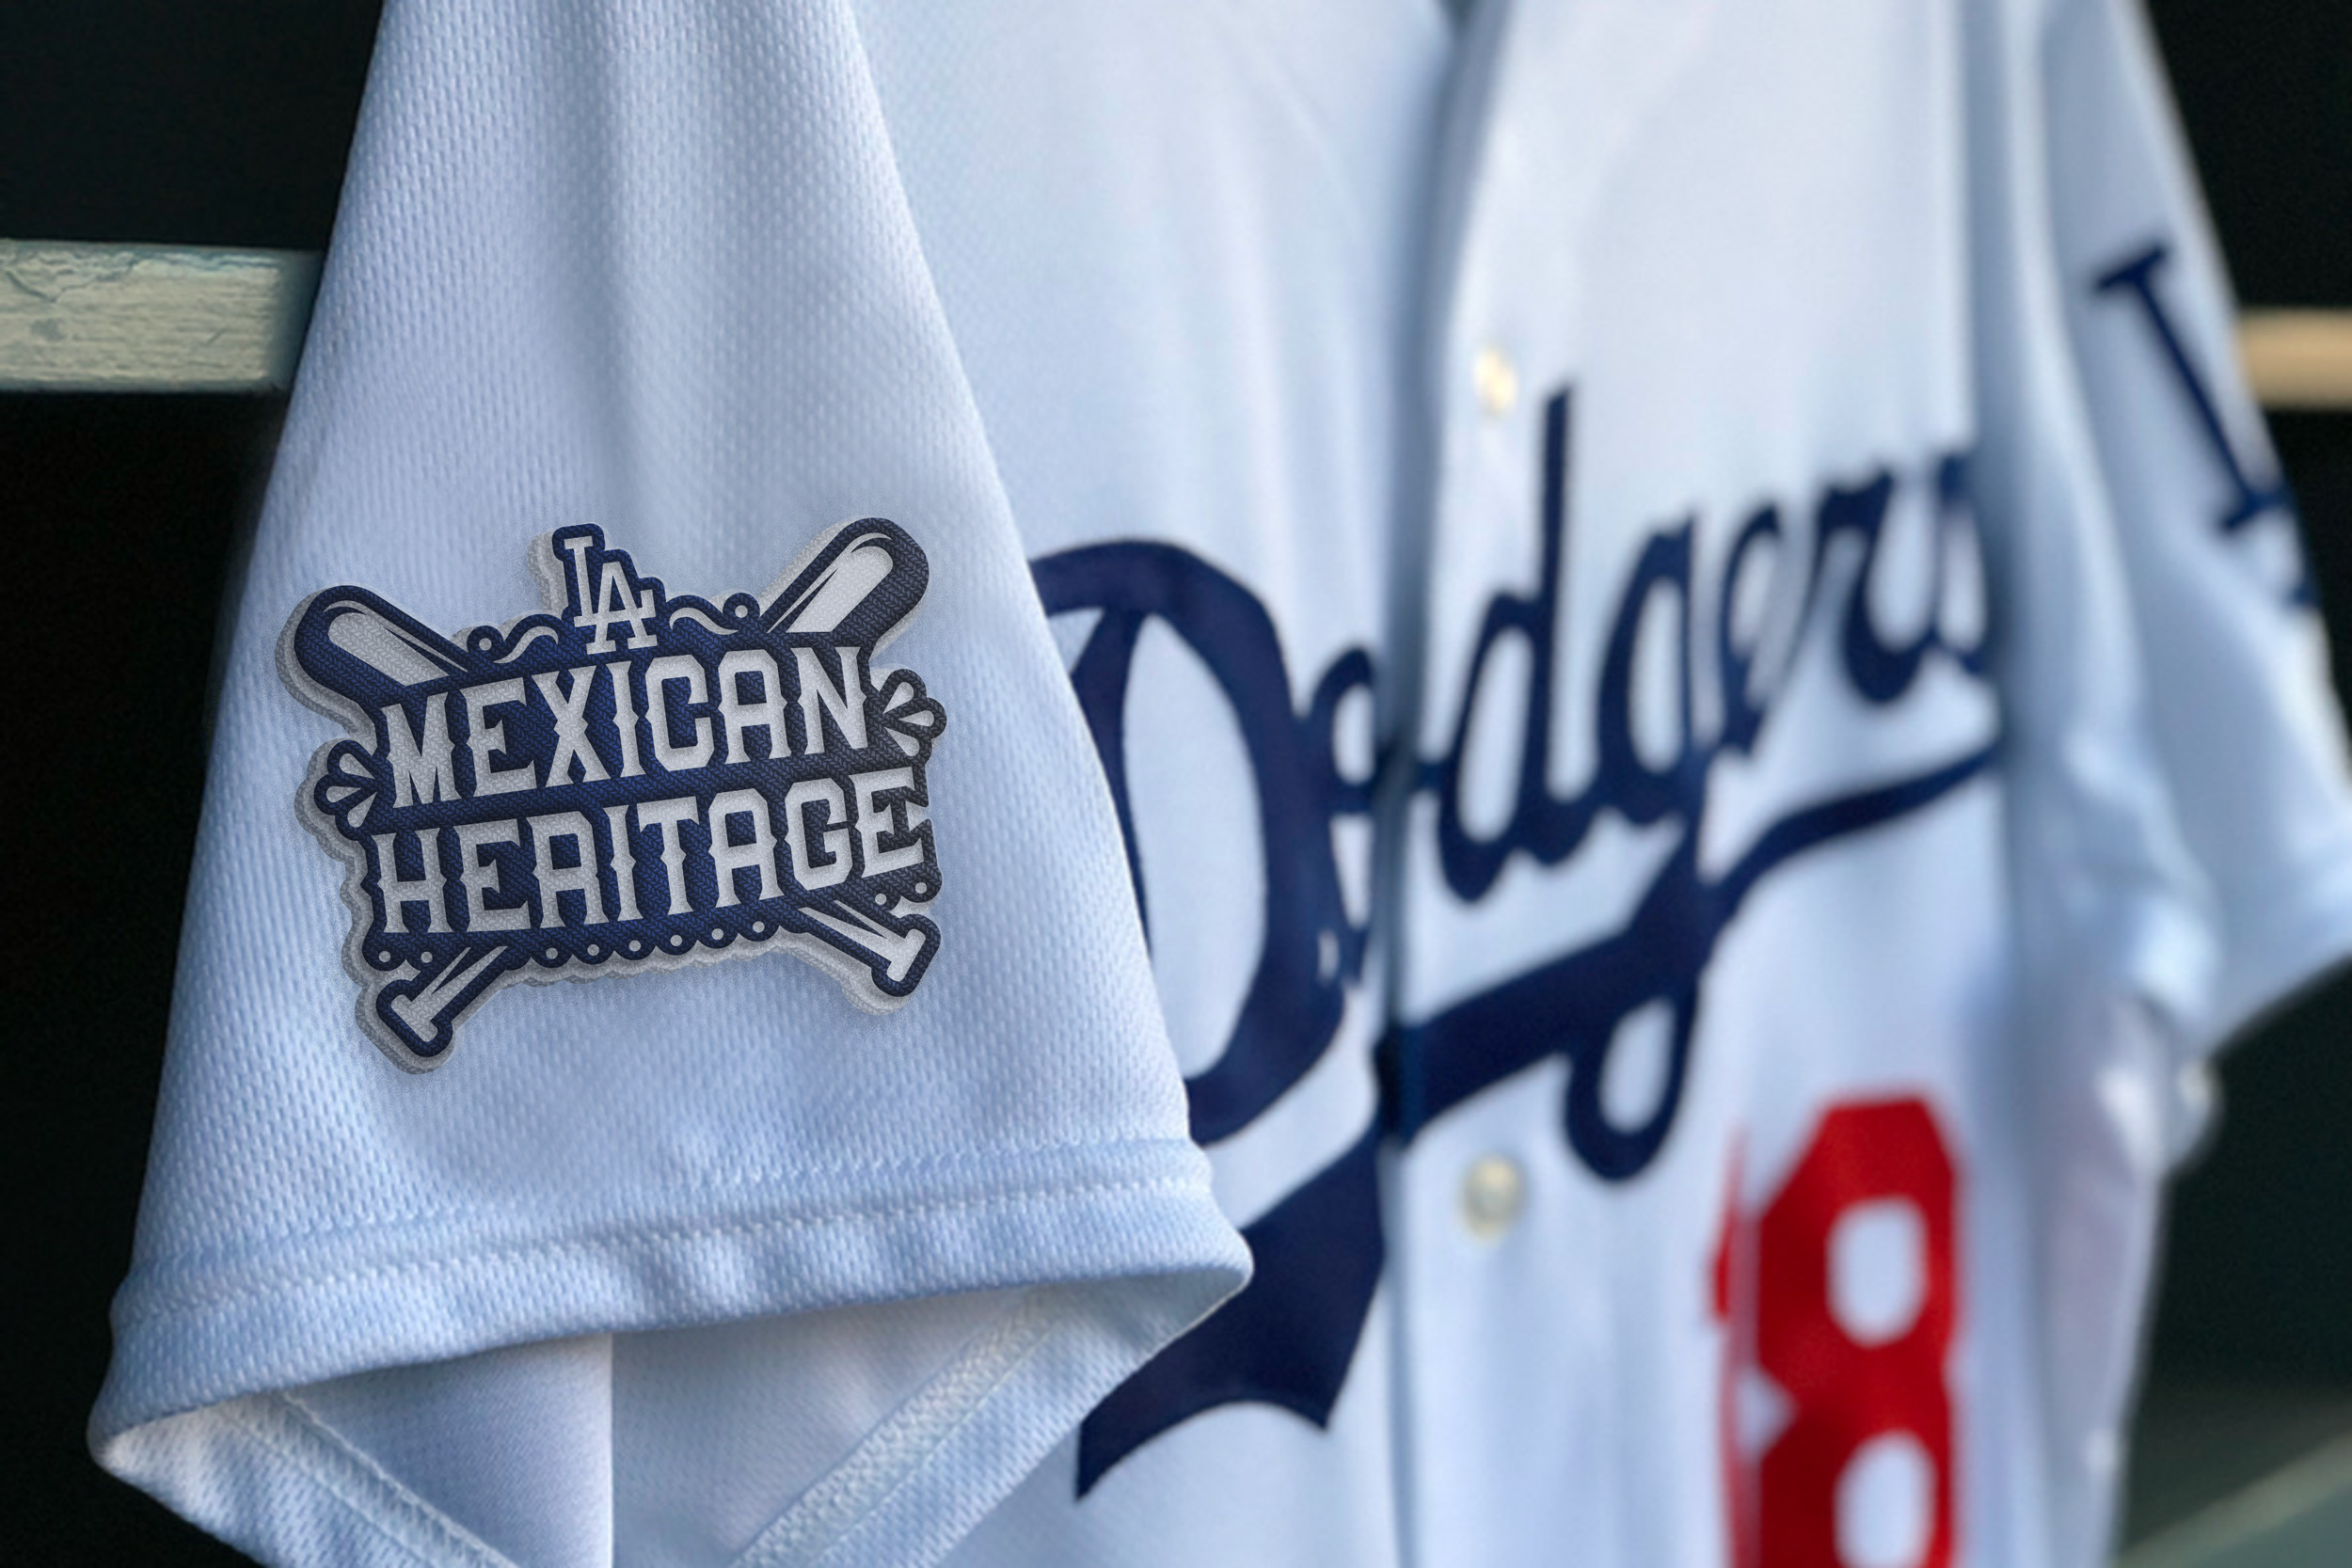 dodgers mexican heritage shirt